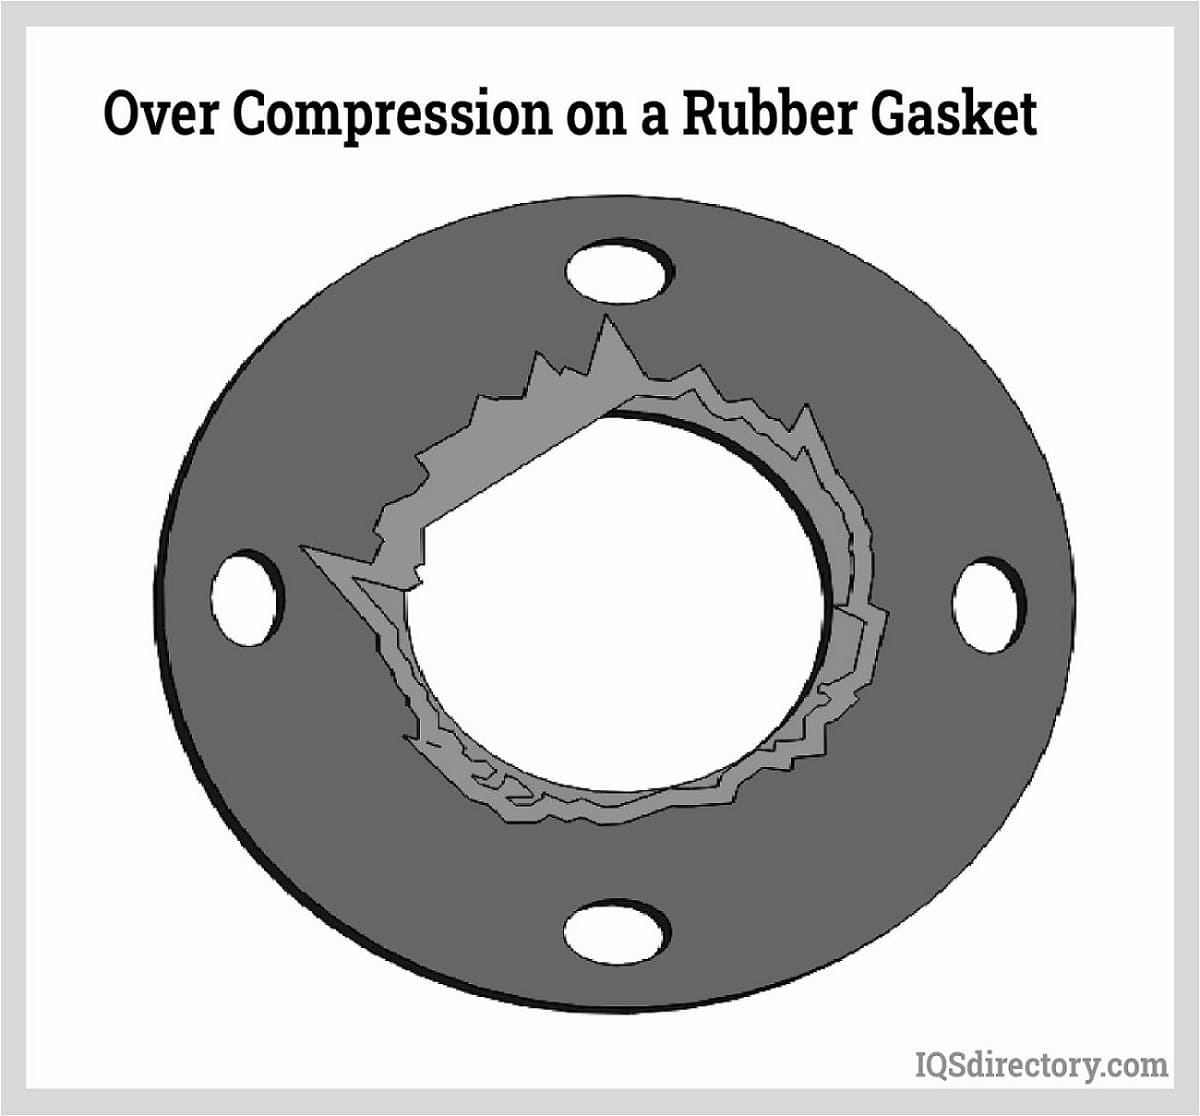 Over Compression on a Rubber Gasket